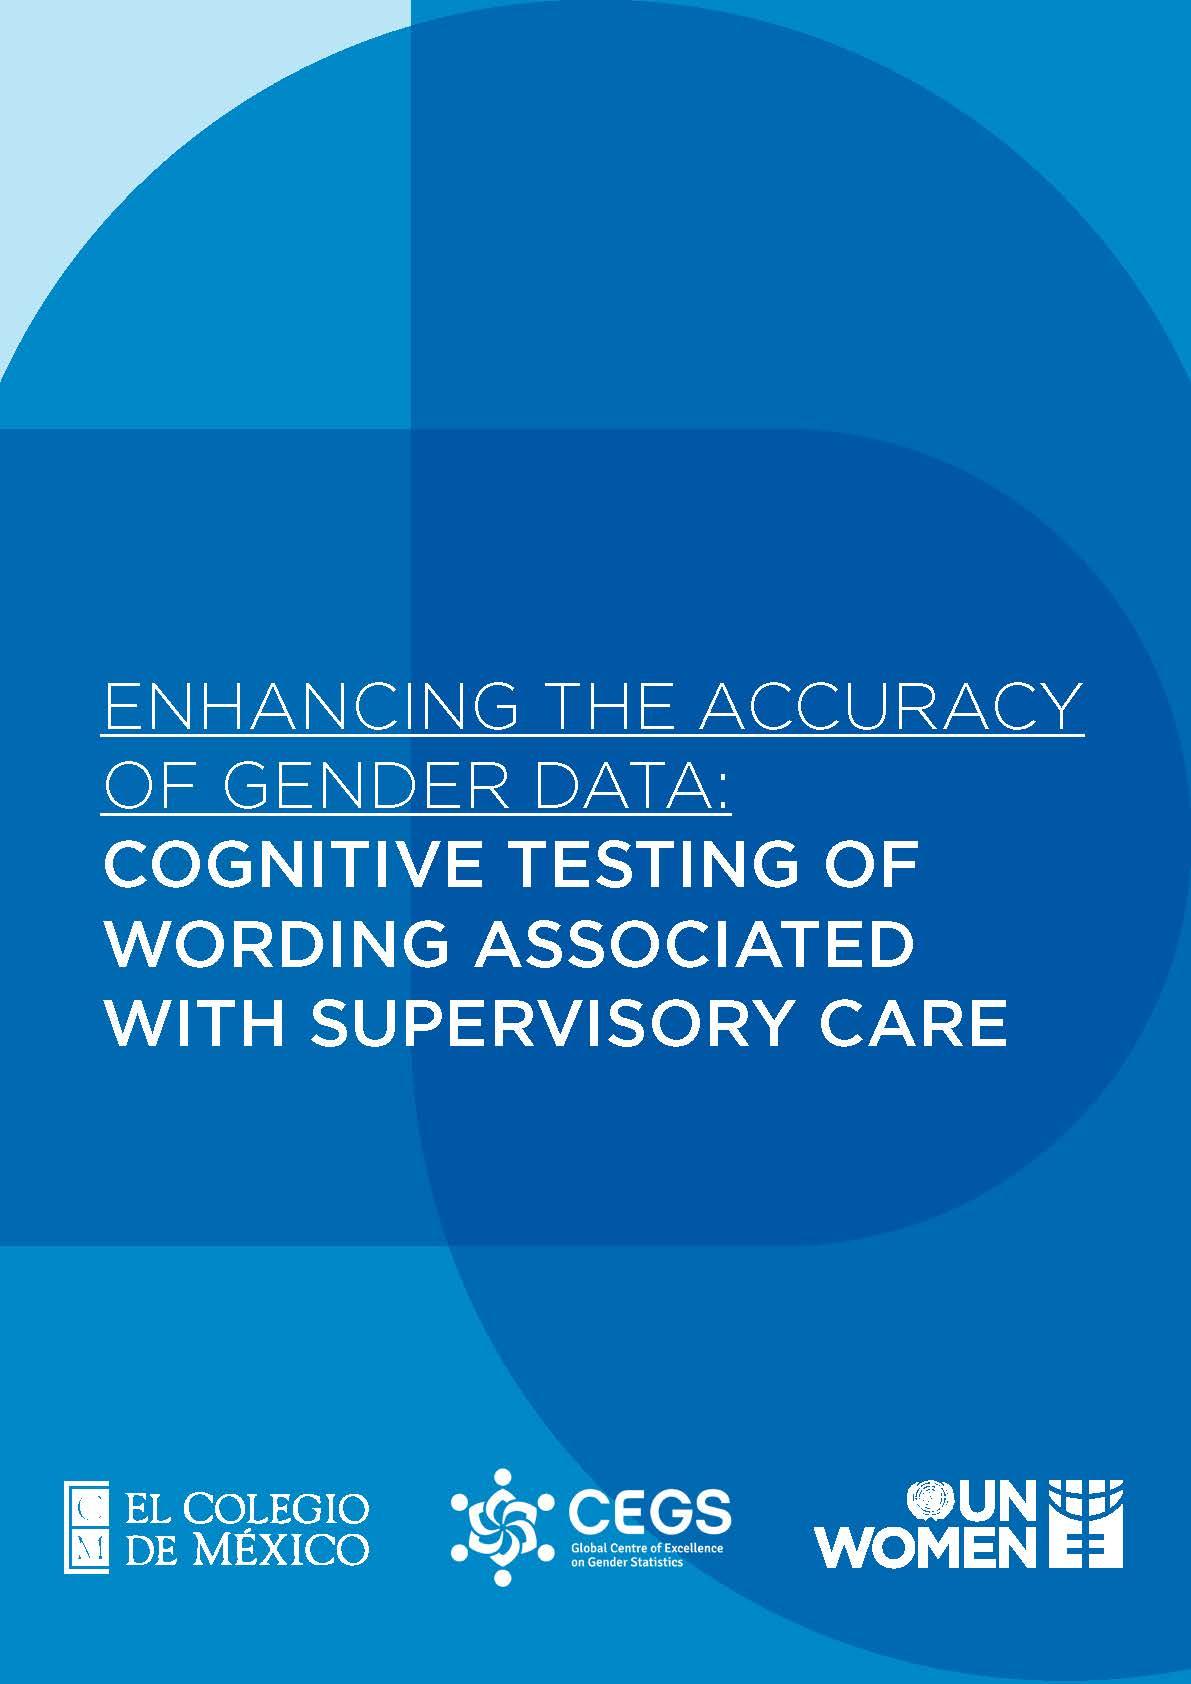 Enhancing the accuracy of gender data: Cognitive testing of wording associated with supervisory care